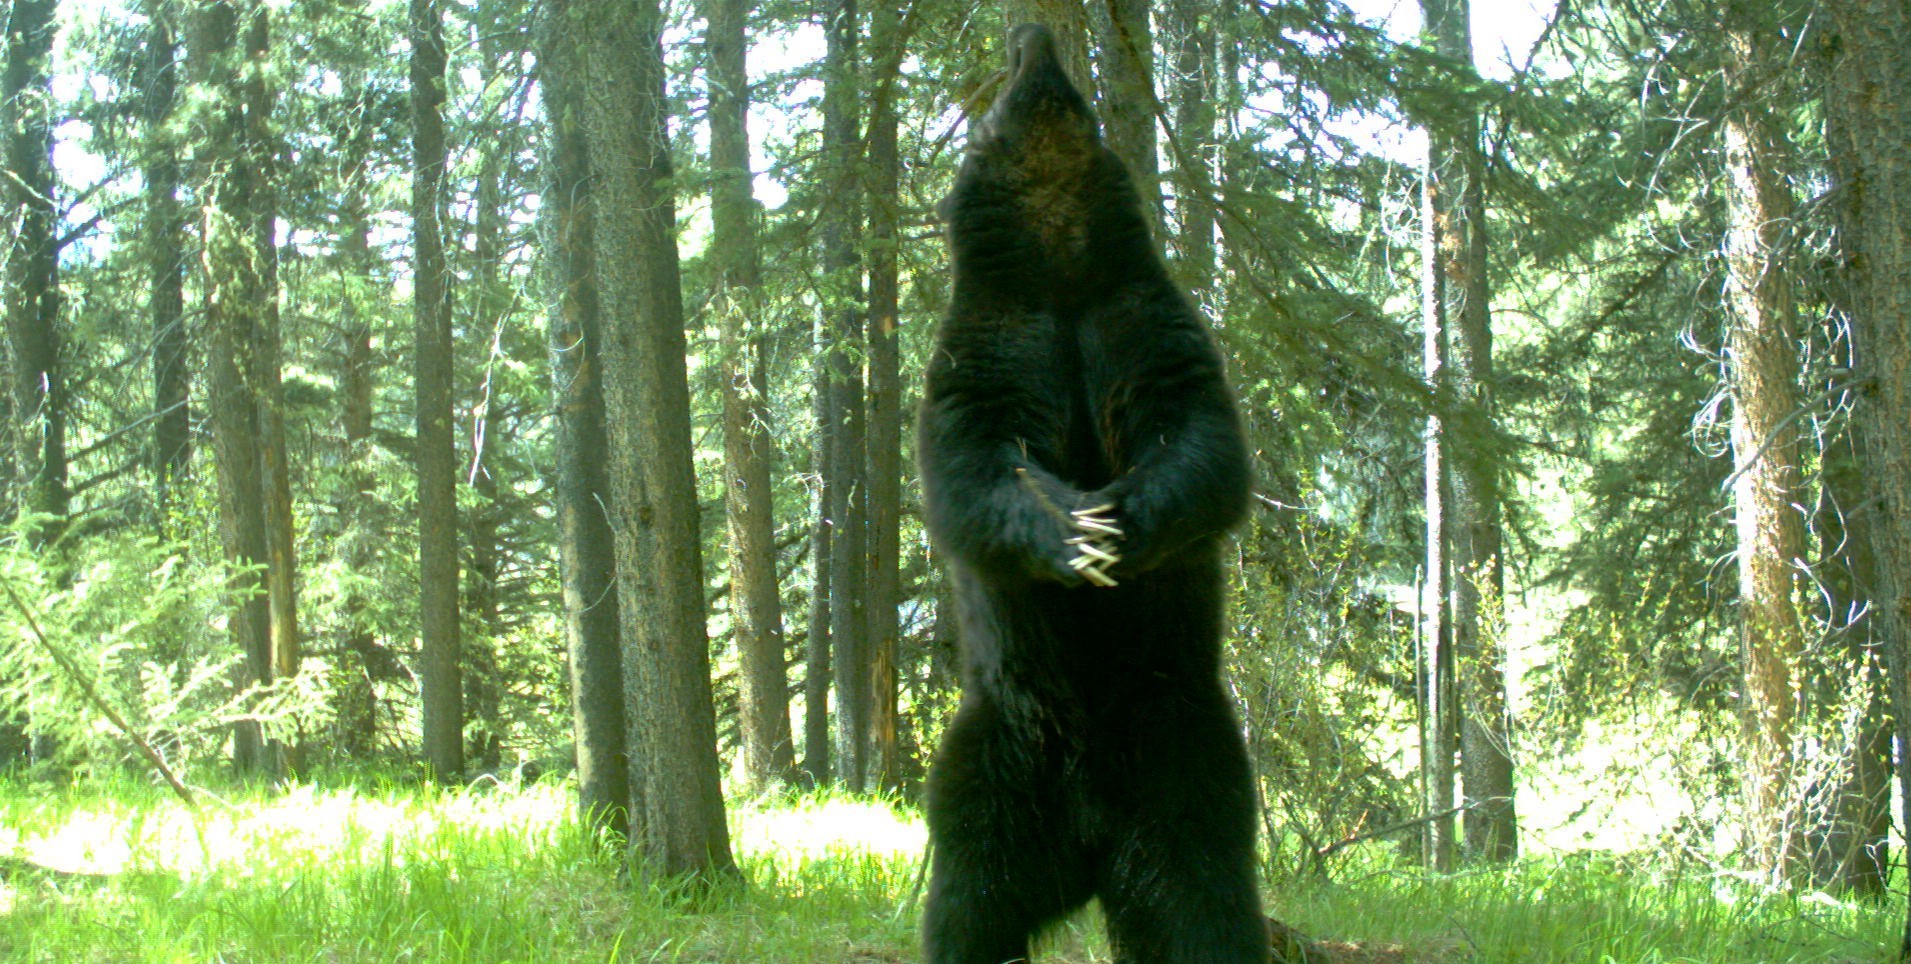 A grizzly bear stands on its hind legs in a forest.